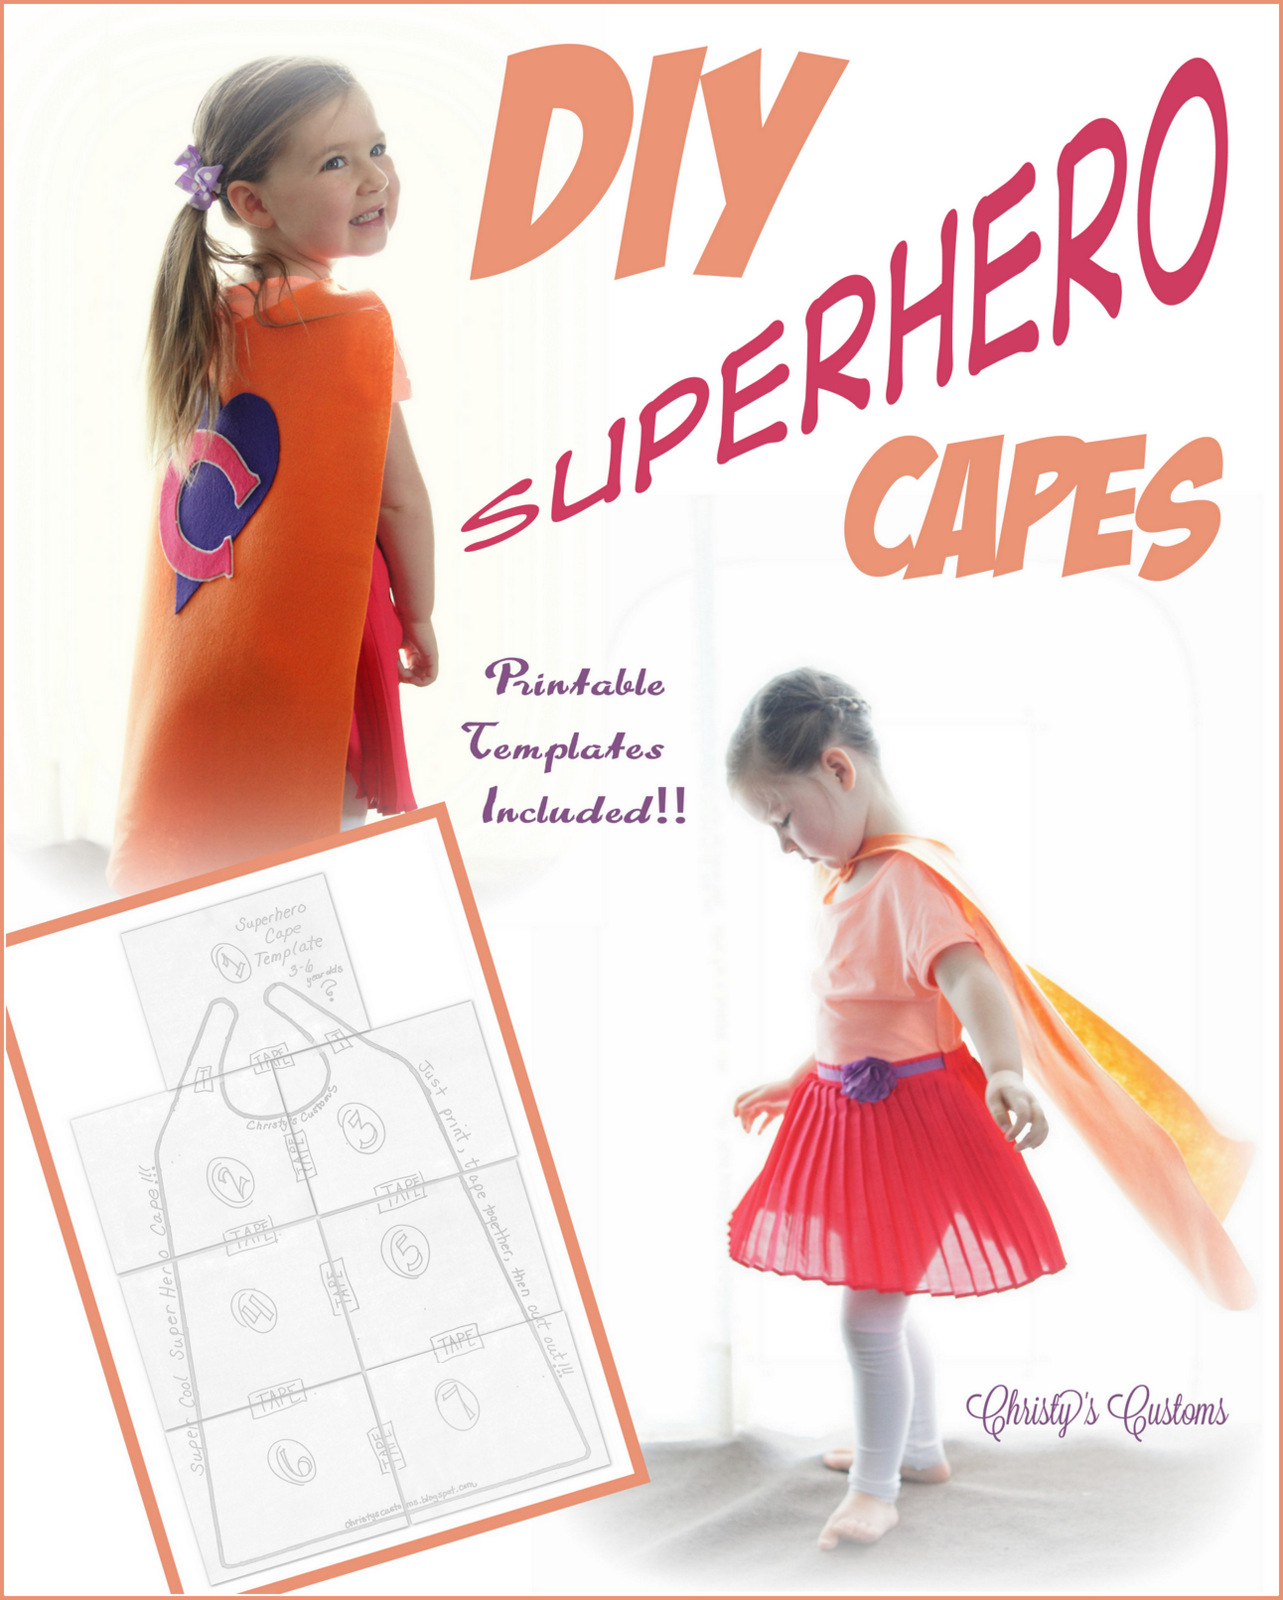 christy-s-customs-and-the-little-house-by-the-olive-tree-diy-superhero